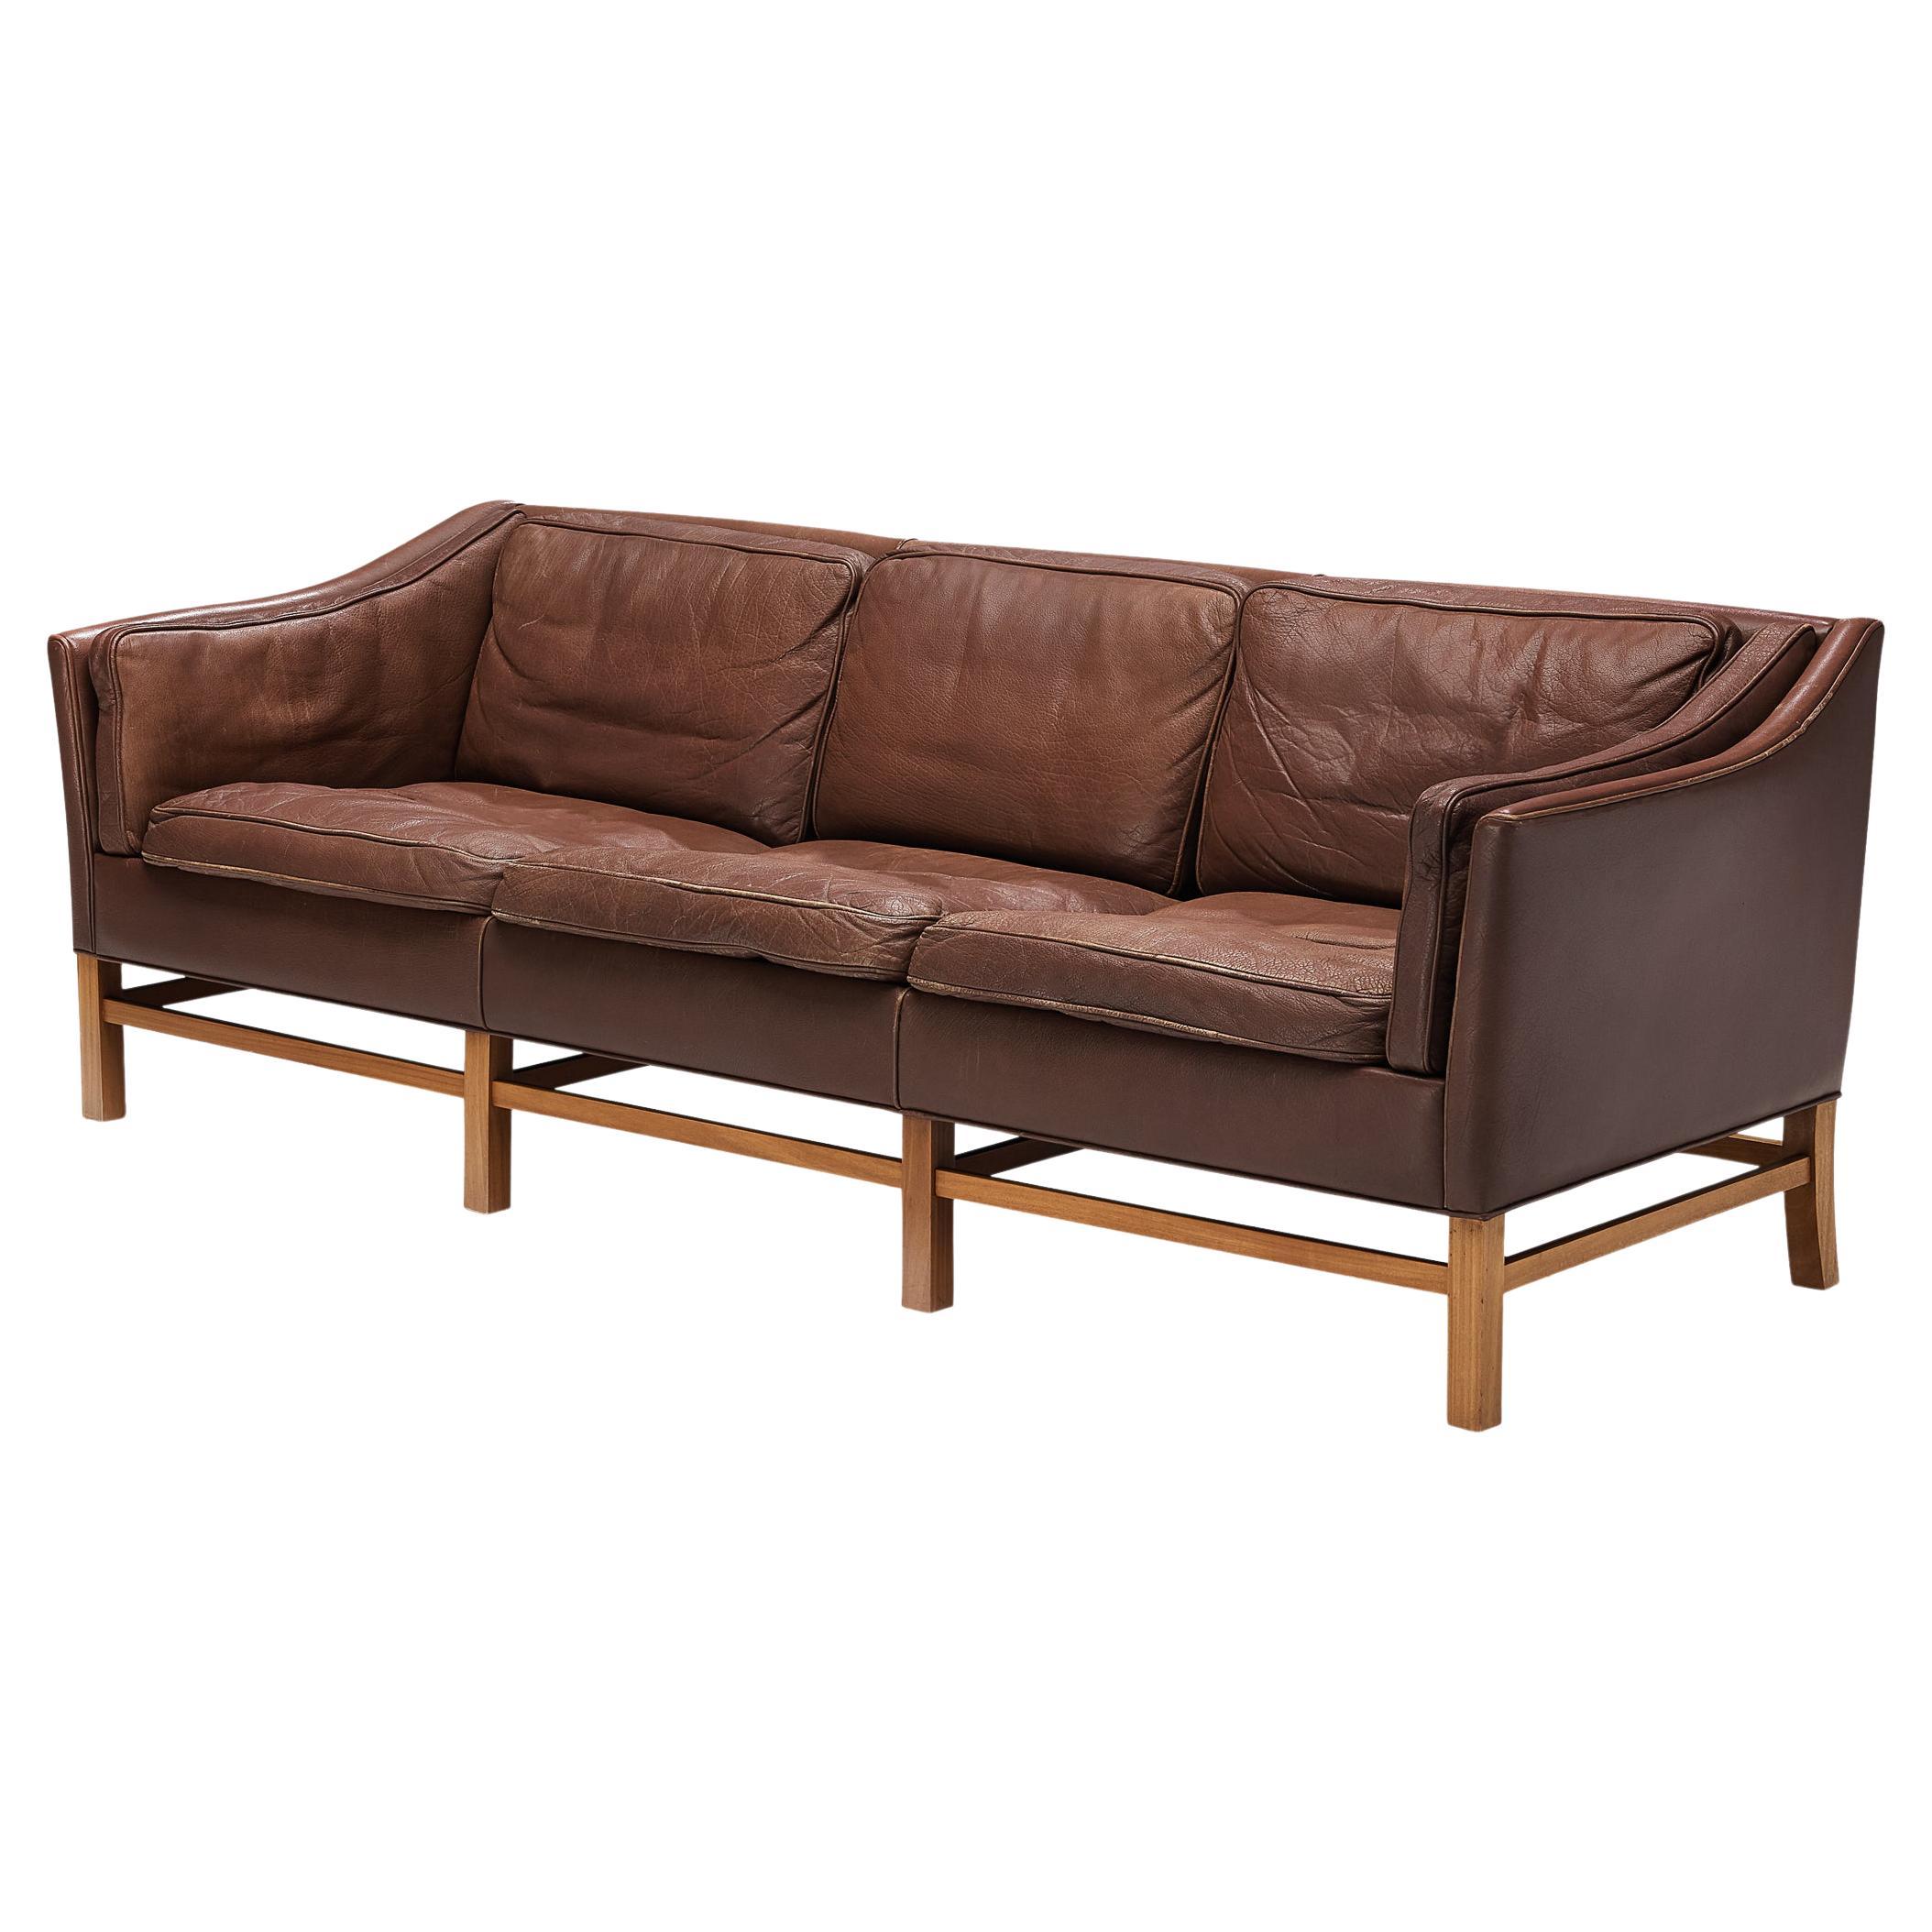 Danish Three Seat Sofa in Umber Leather and Mahogany For Sale